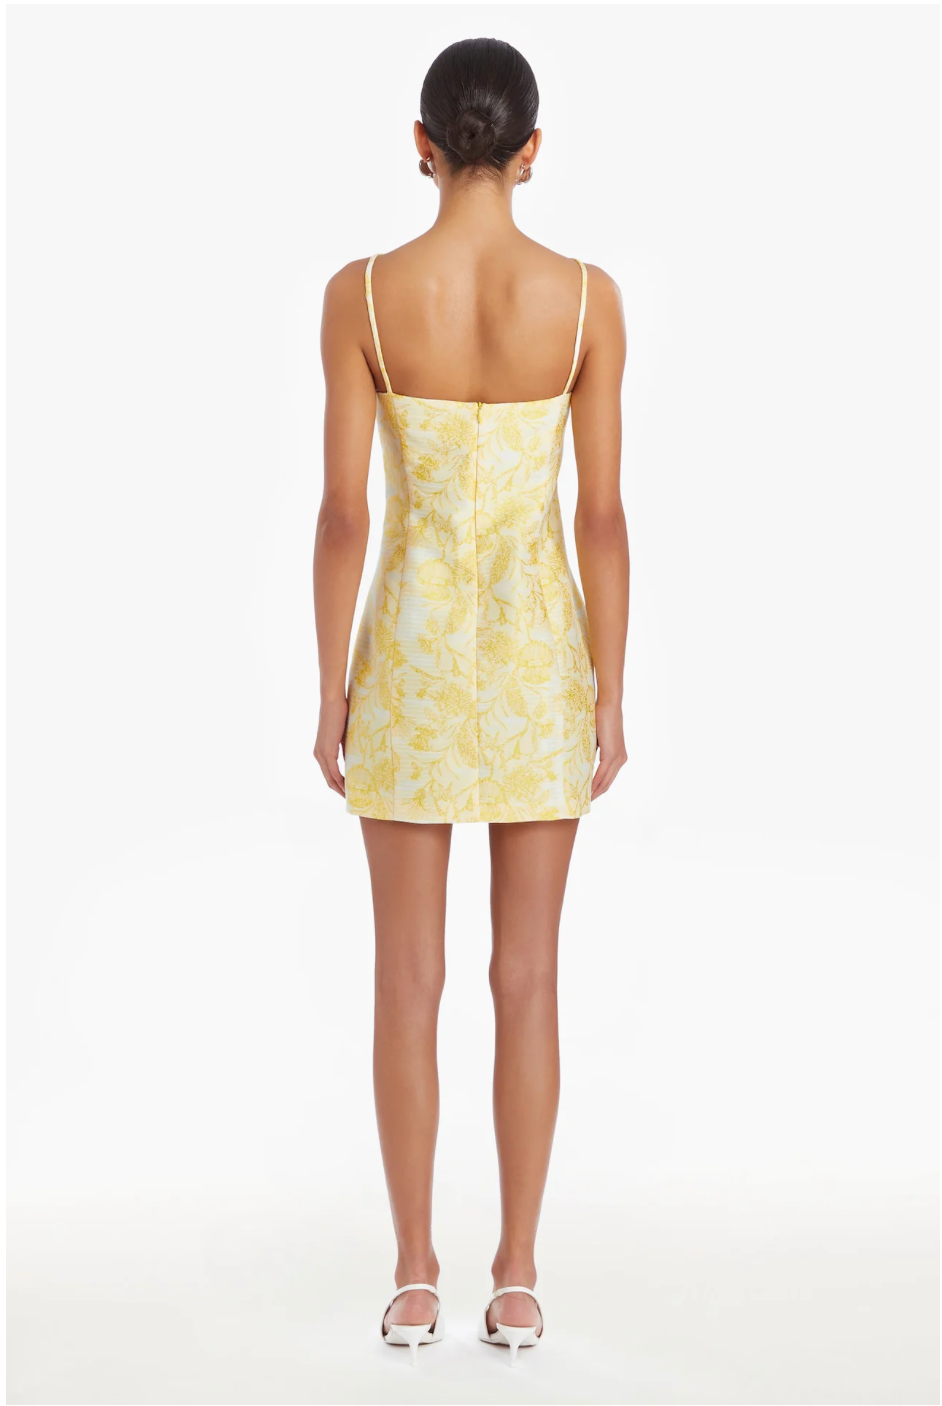 Molly Dress in Electric Yellow